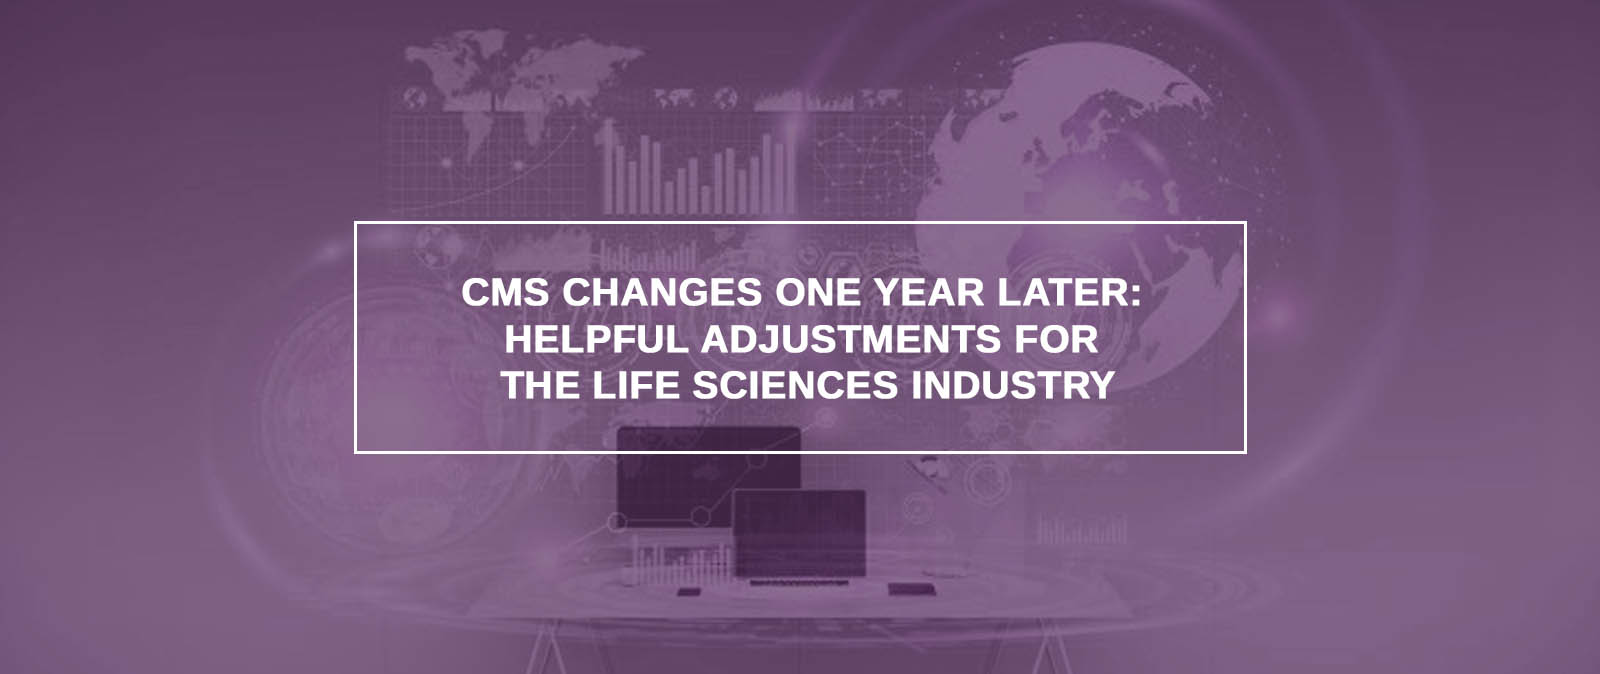 CMS Changes One Year Later: Helpful Adjustments For The Life Sciences Industry